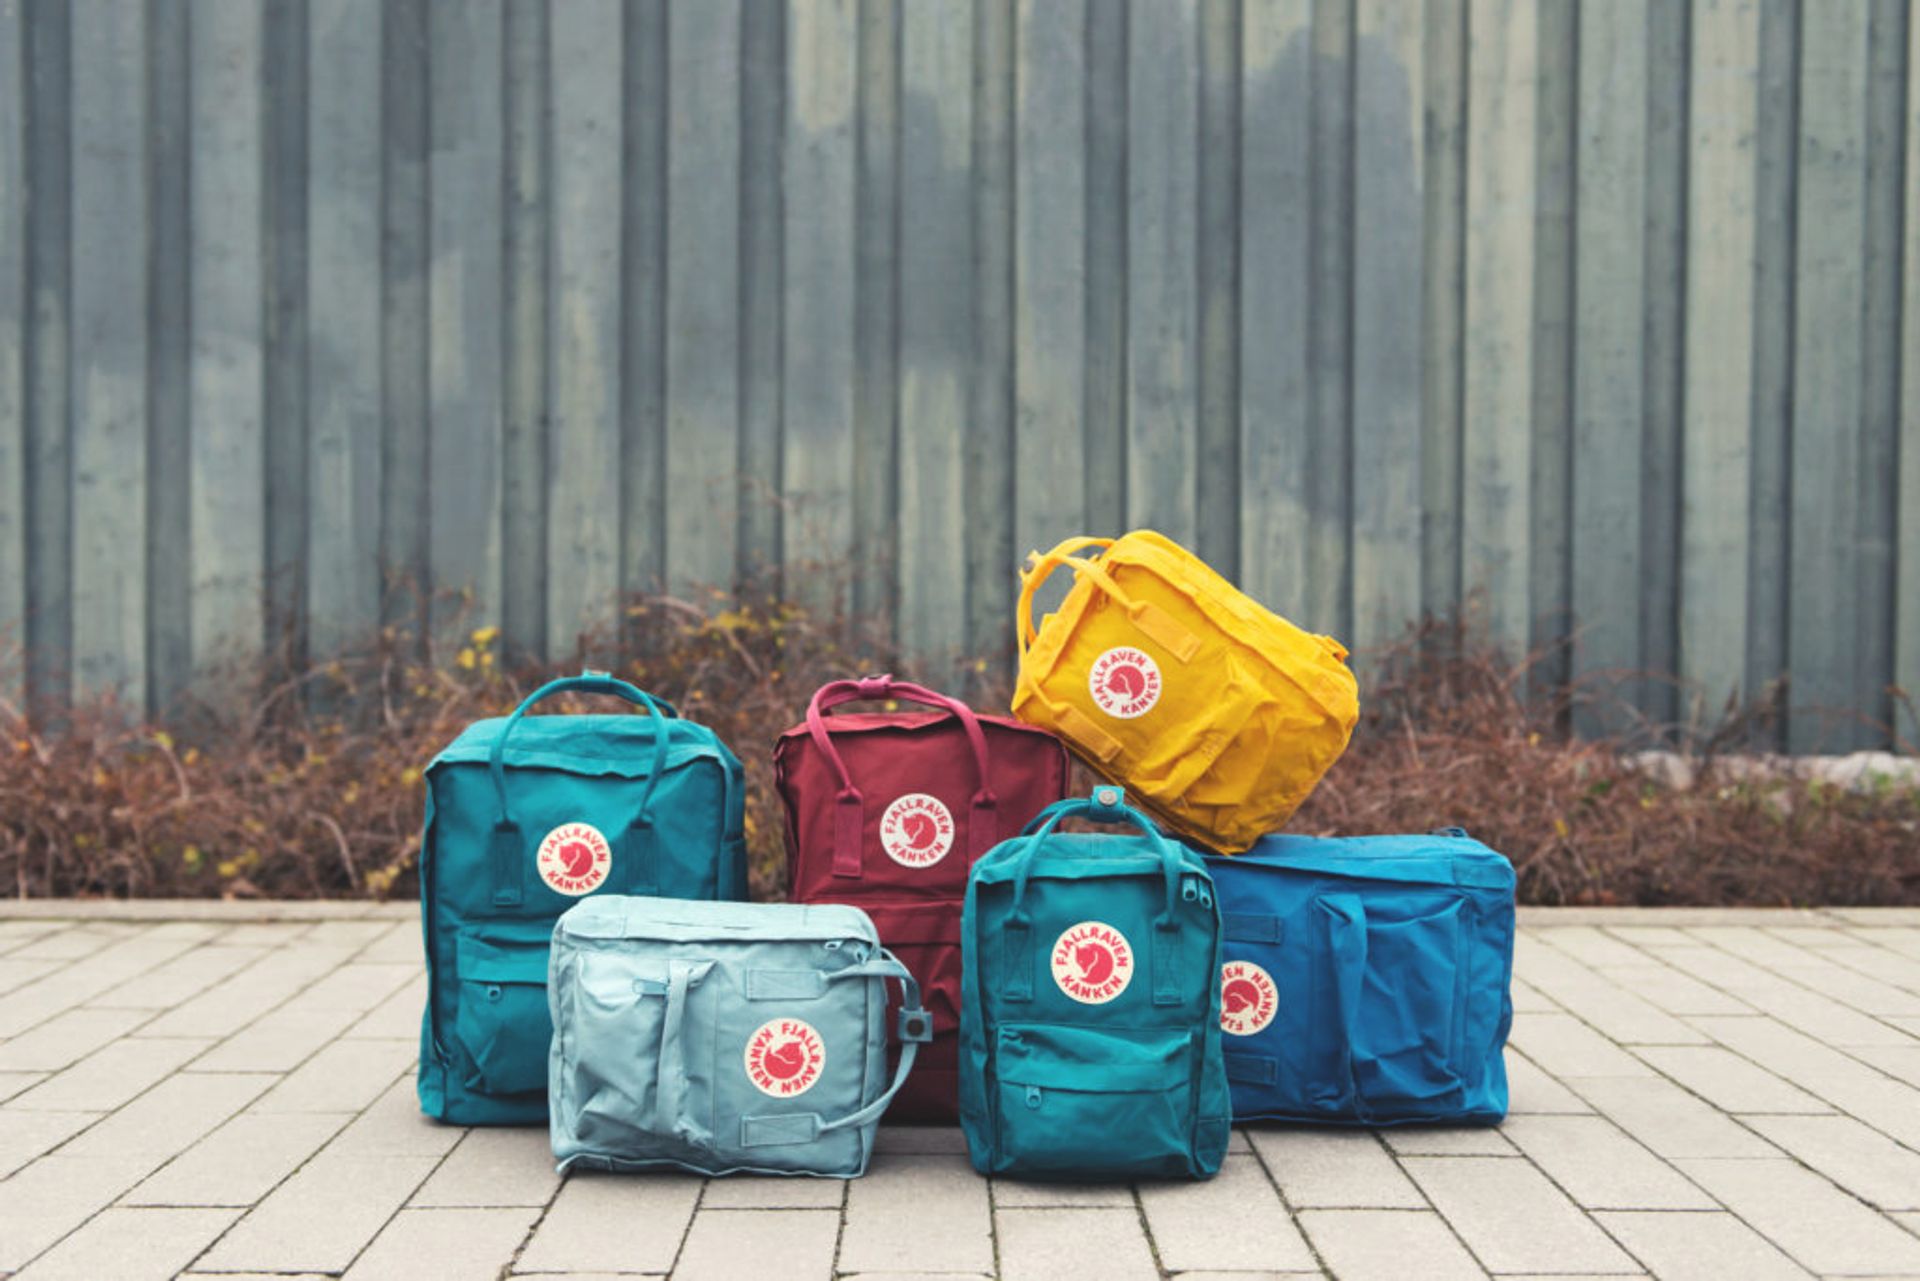 Several backpacks in different colours.